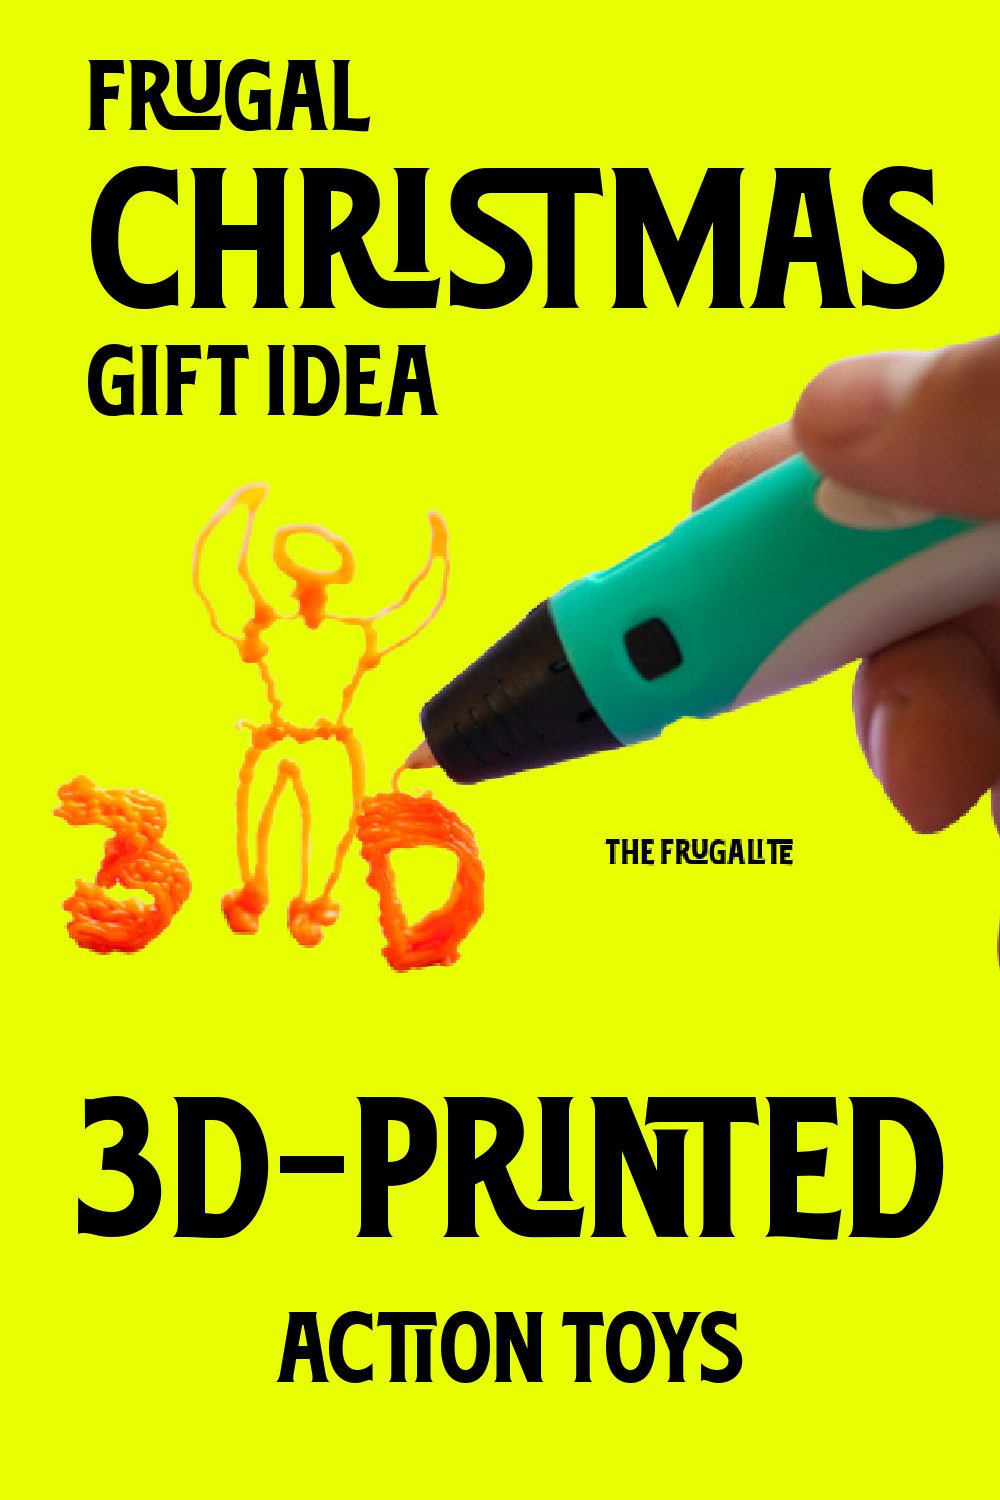 Frugal Christmas Gift Idea: 3D-Printed Action Toys